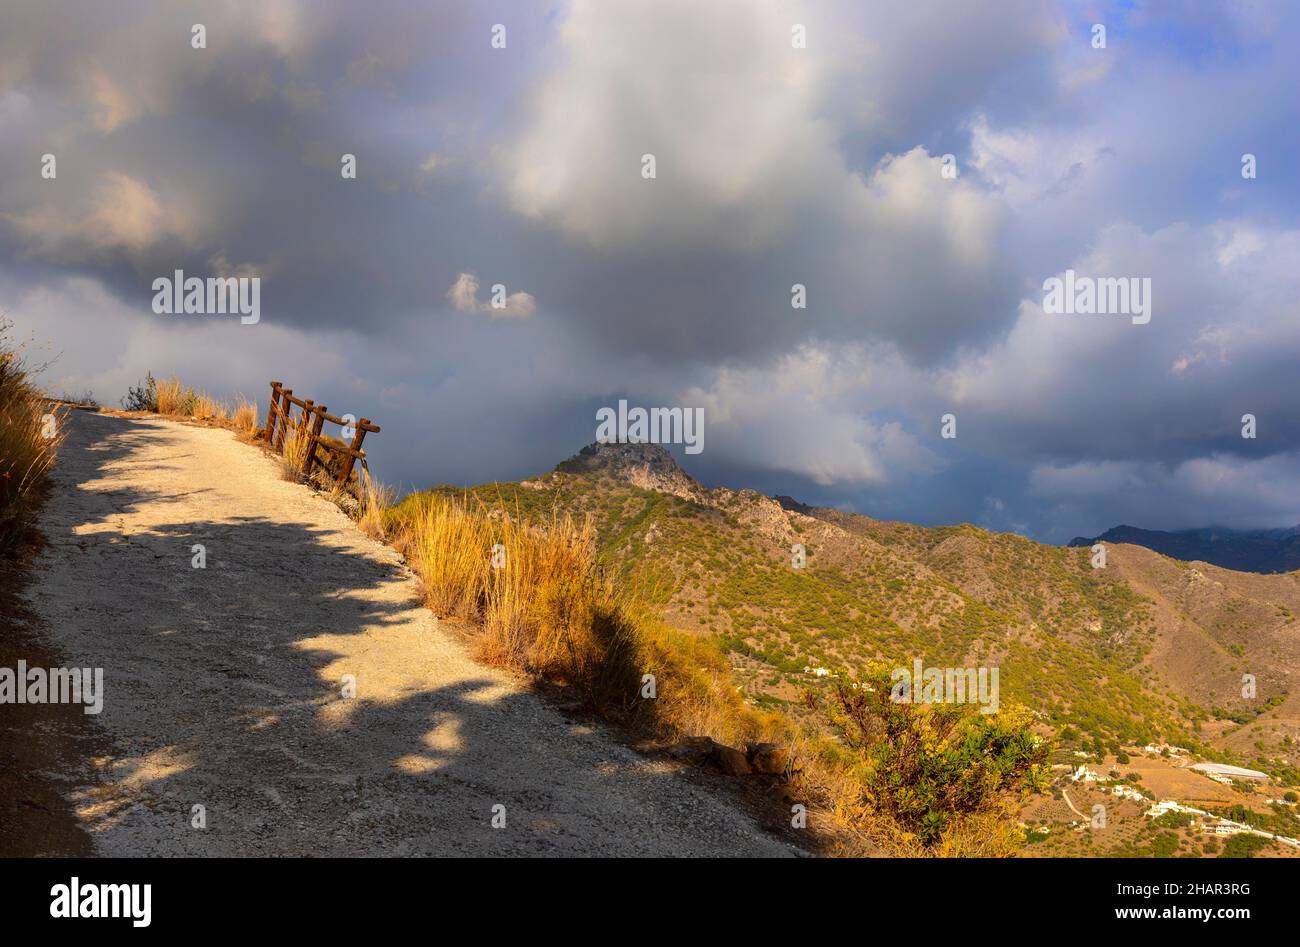 Country road with the distant El Fuerte mountain, part of the Sierra de Almijara, malaga Province, Andalucia, Spain Stock Photo